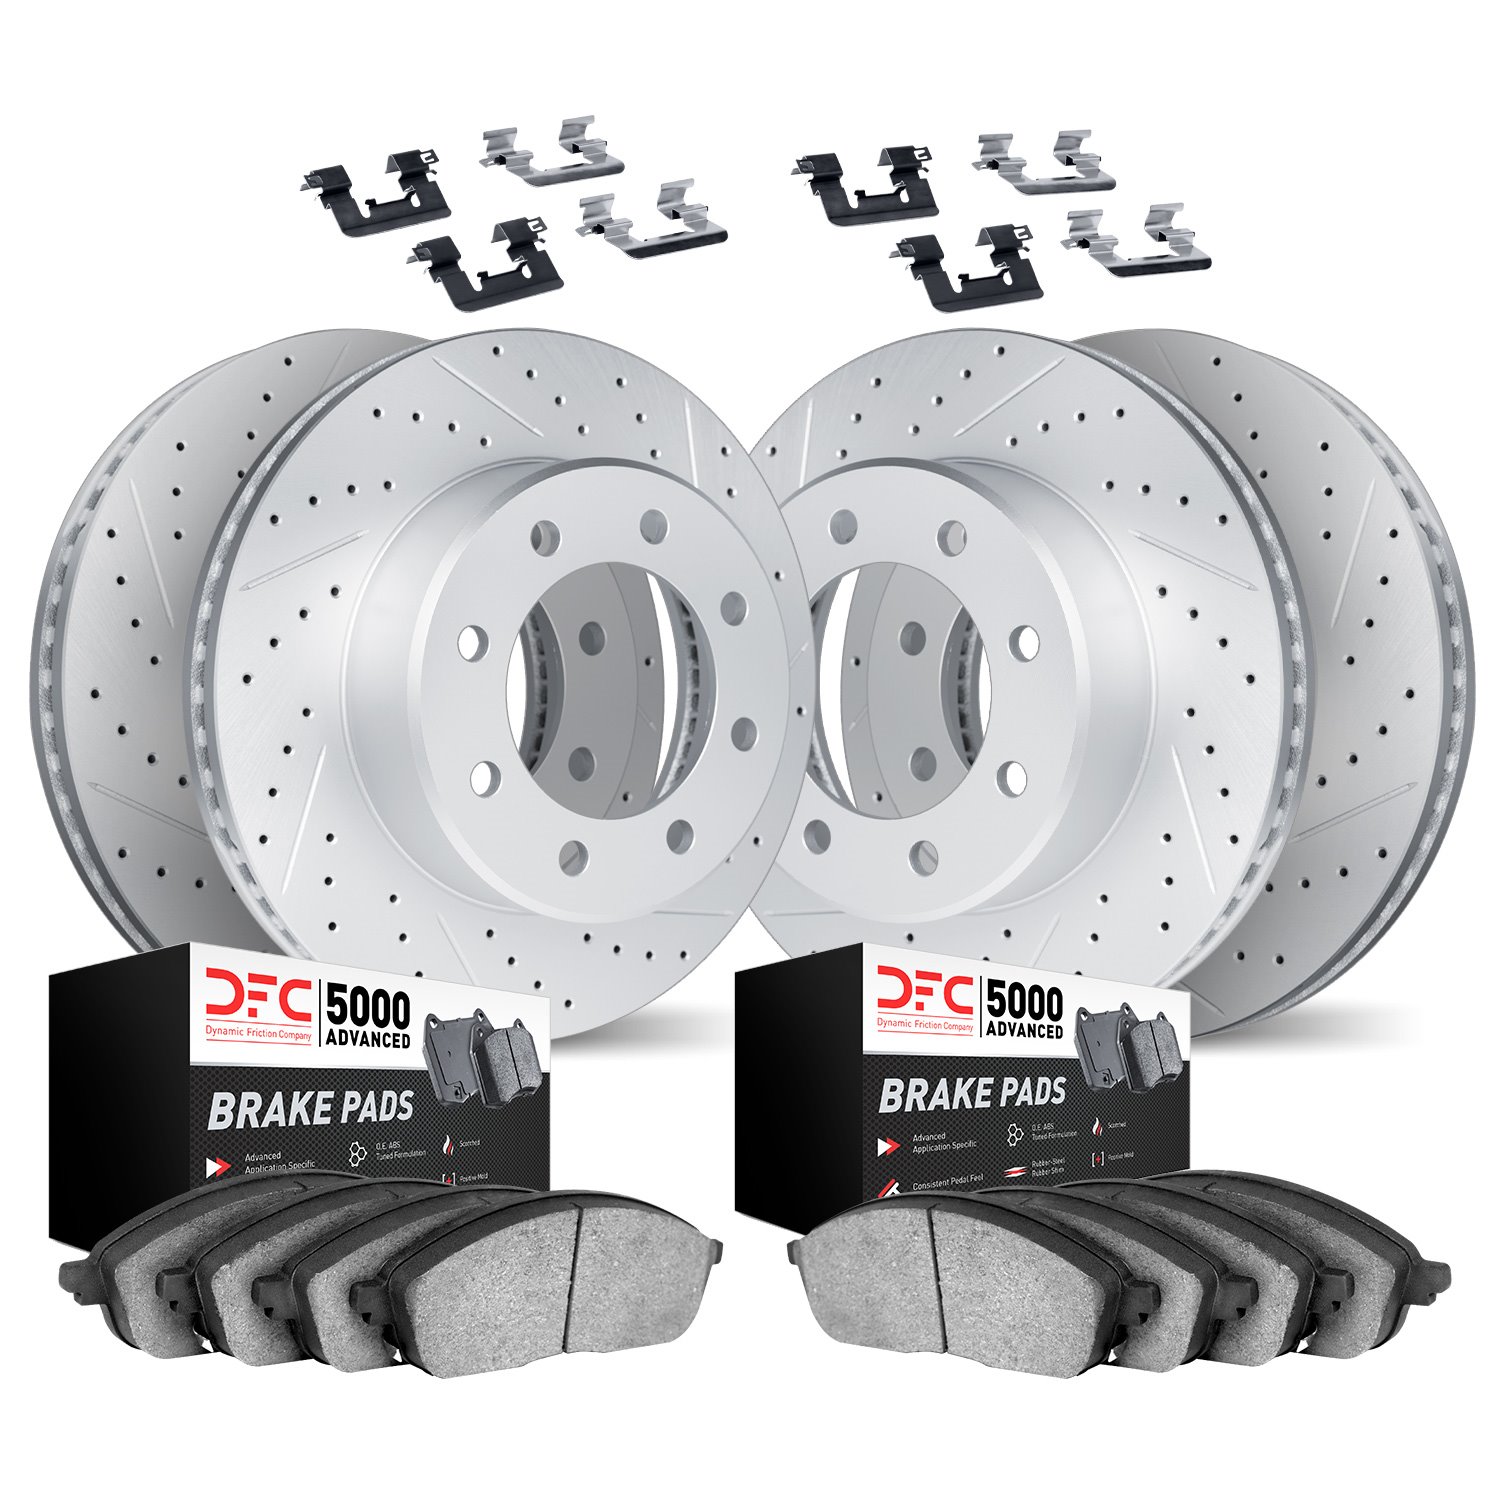 2514-48040 Geoperformance Drilled/Slotted Rotors w/5000 Advanced Brake Pads Kit & Hardware, Fits Select GM, Position: Front and